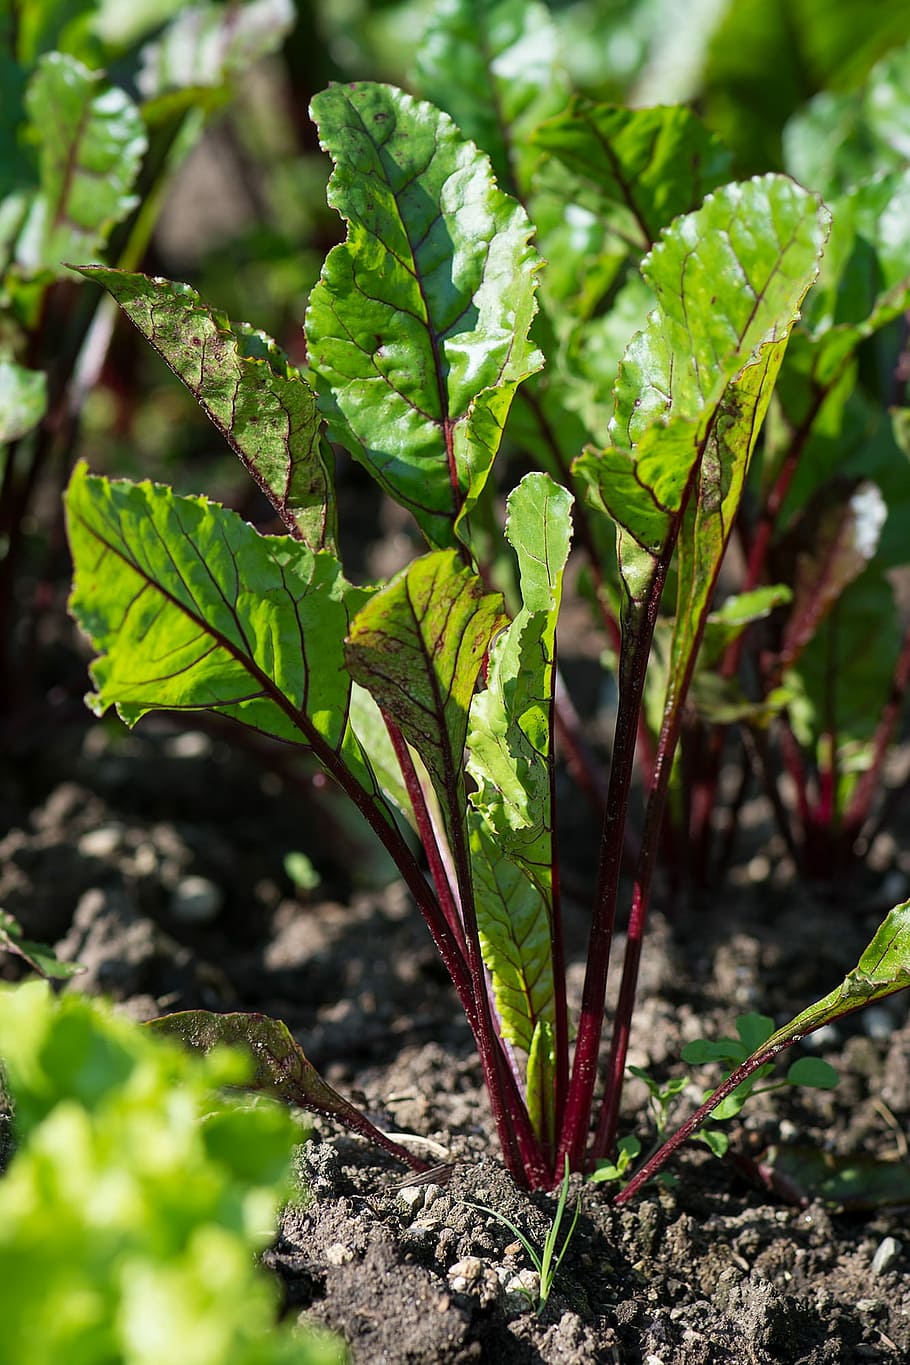 Beetroot, Beet, Edge, Foxtail, Plant, the edge, foxtail plant, garden, in the garden, green